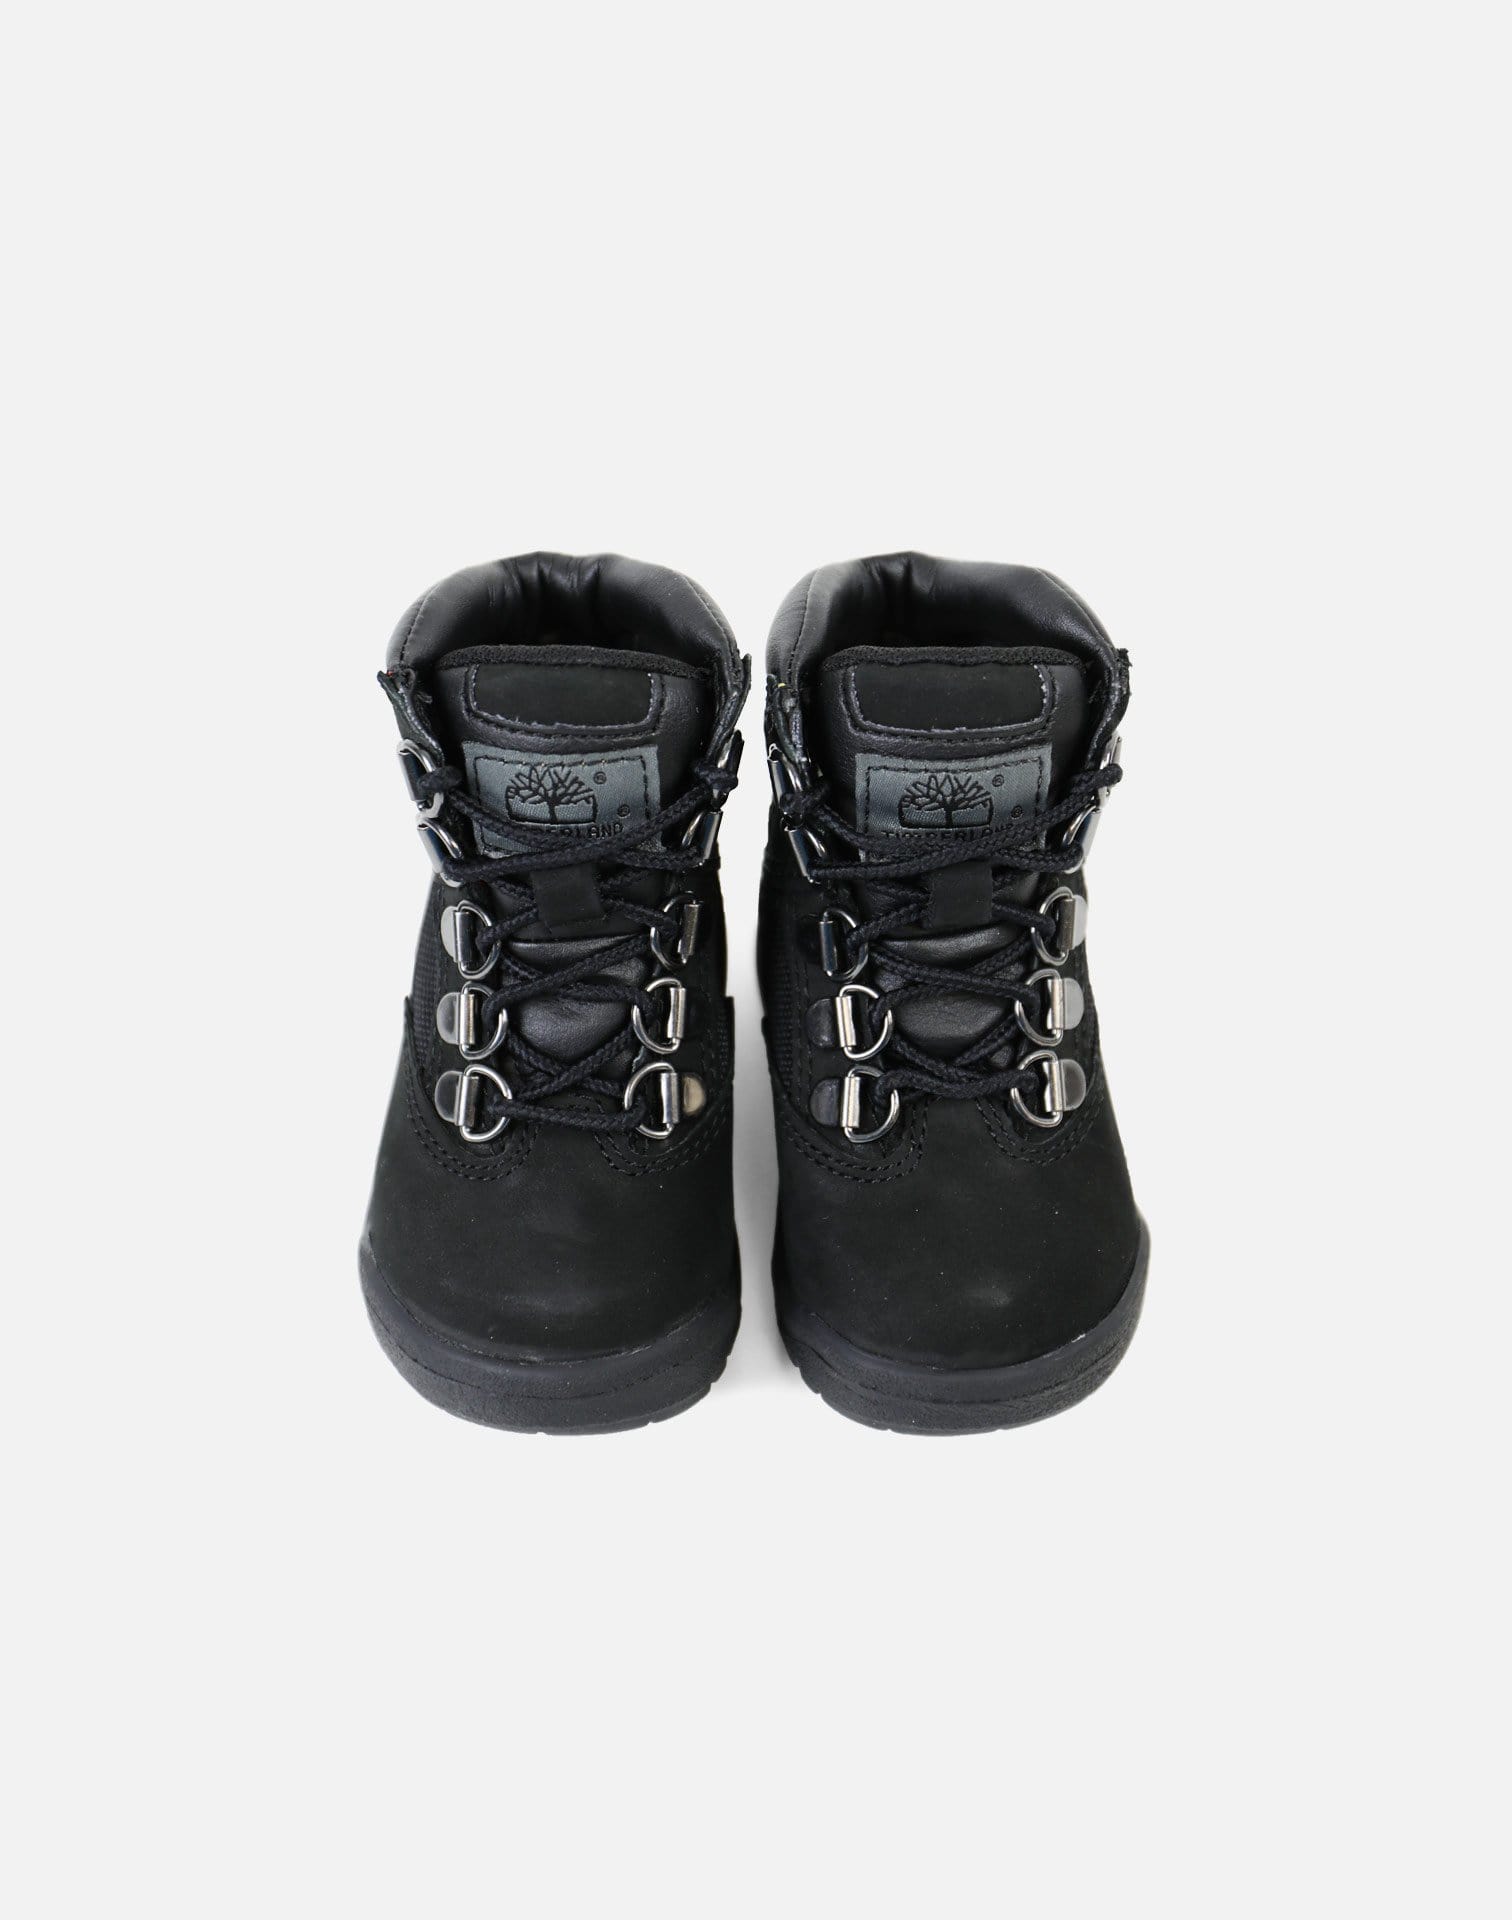 Timberland 6" PREMIUM FIELD BOOTS INFANT